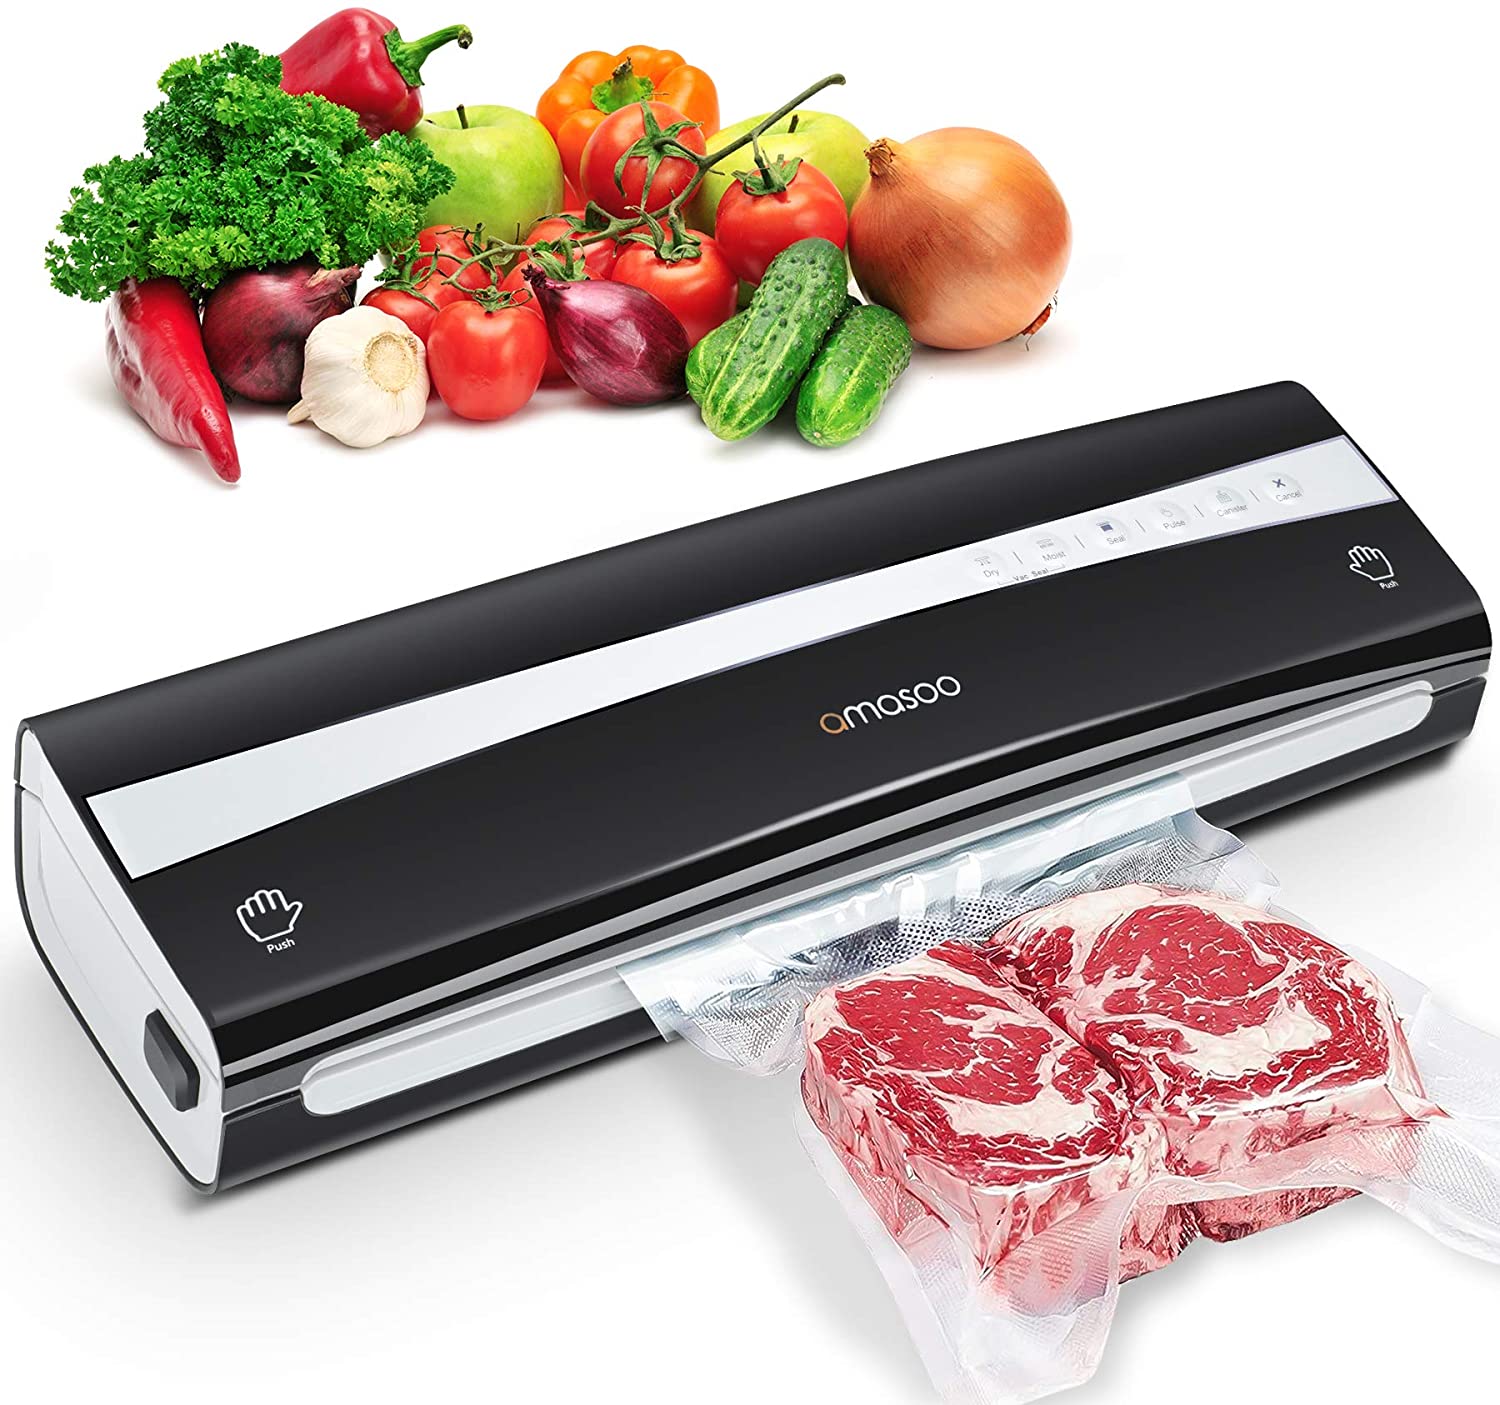 Crownful Automatic Vacuum Sealer Machine, Dry & Moist Food Sealer, Air Sealer Machine with Vacuum Seal Bags